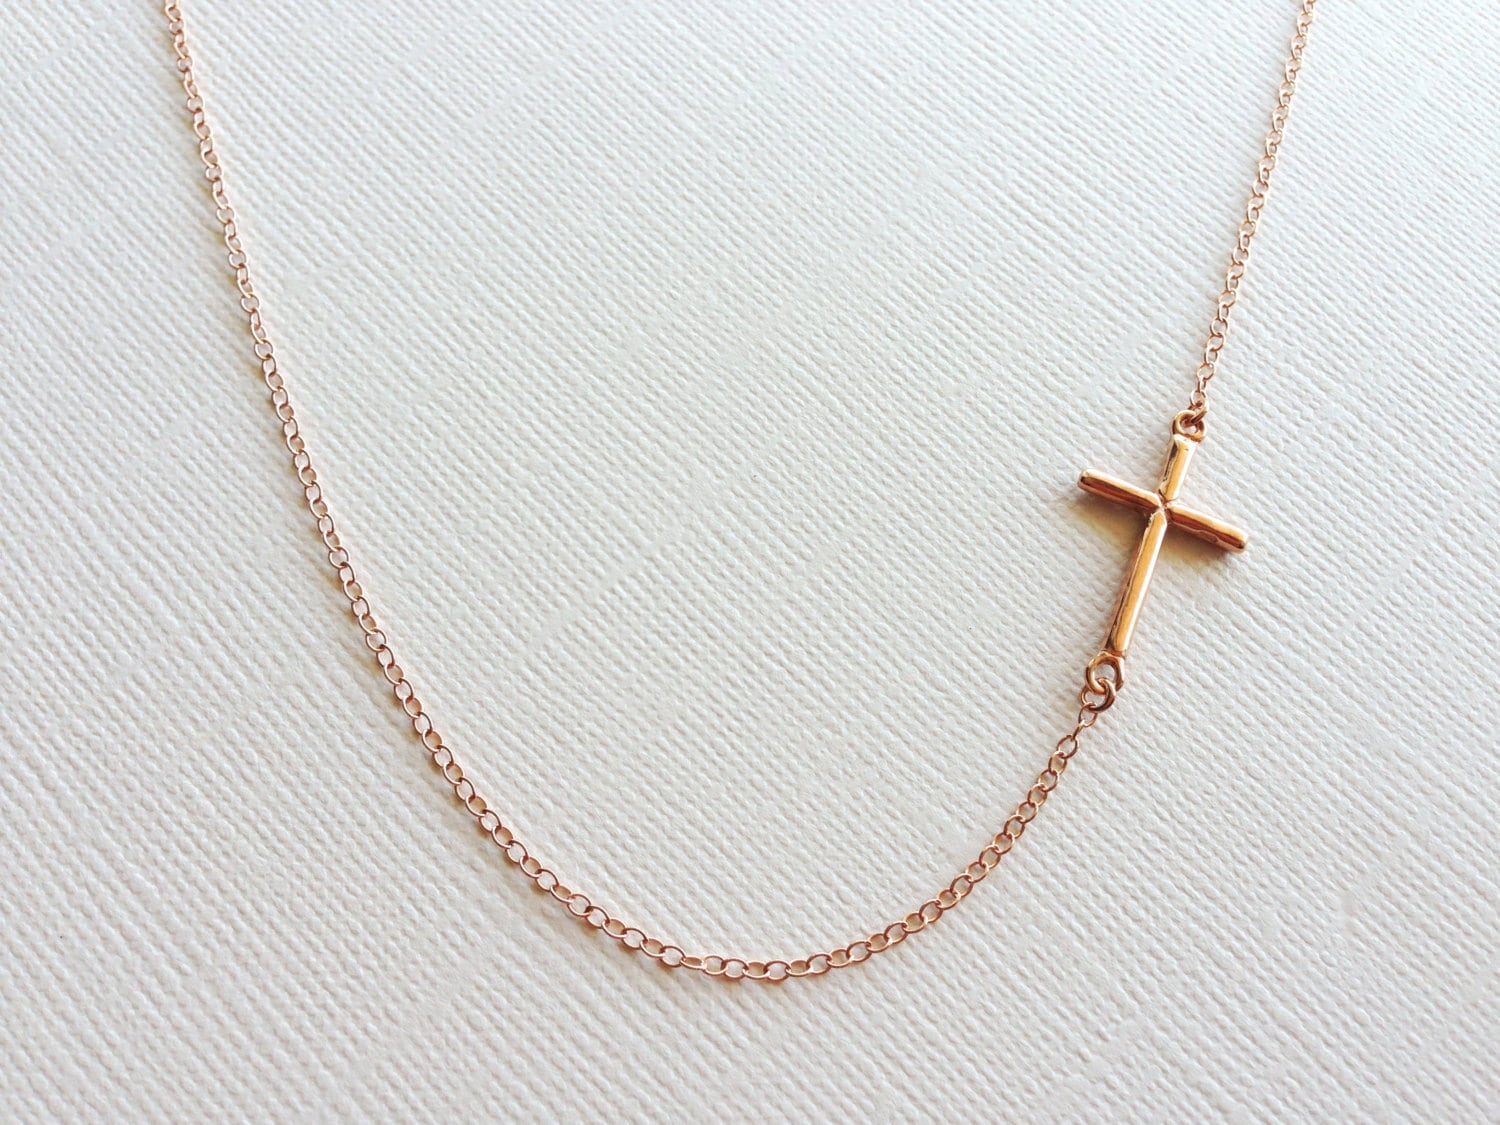 14K Rose Gold Small Sideways Curved Cross Necklace 19 Inch - Walmart.com